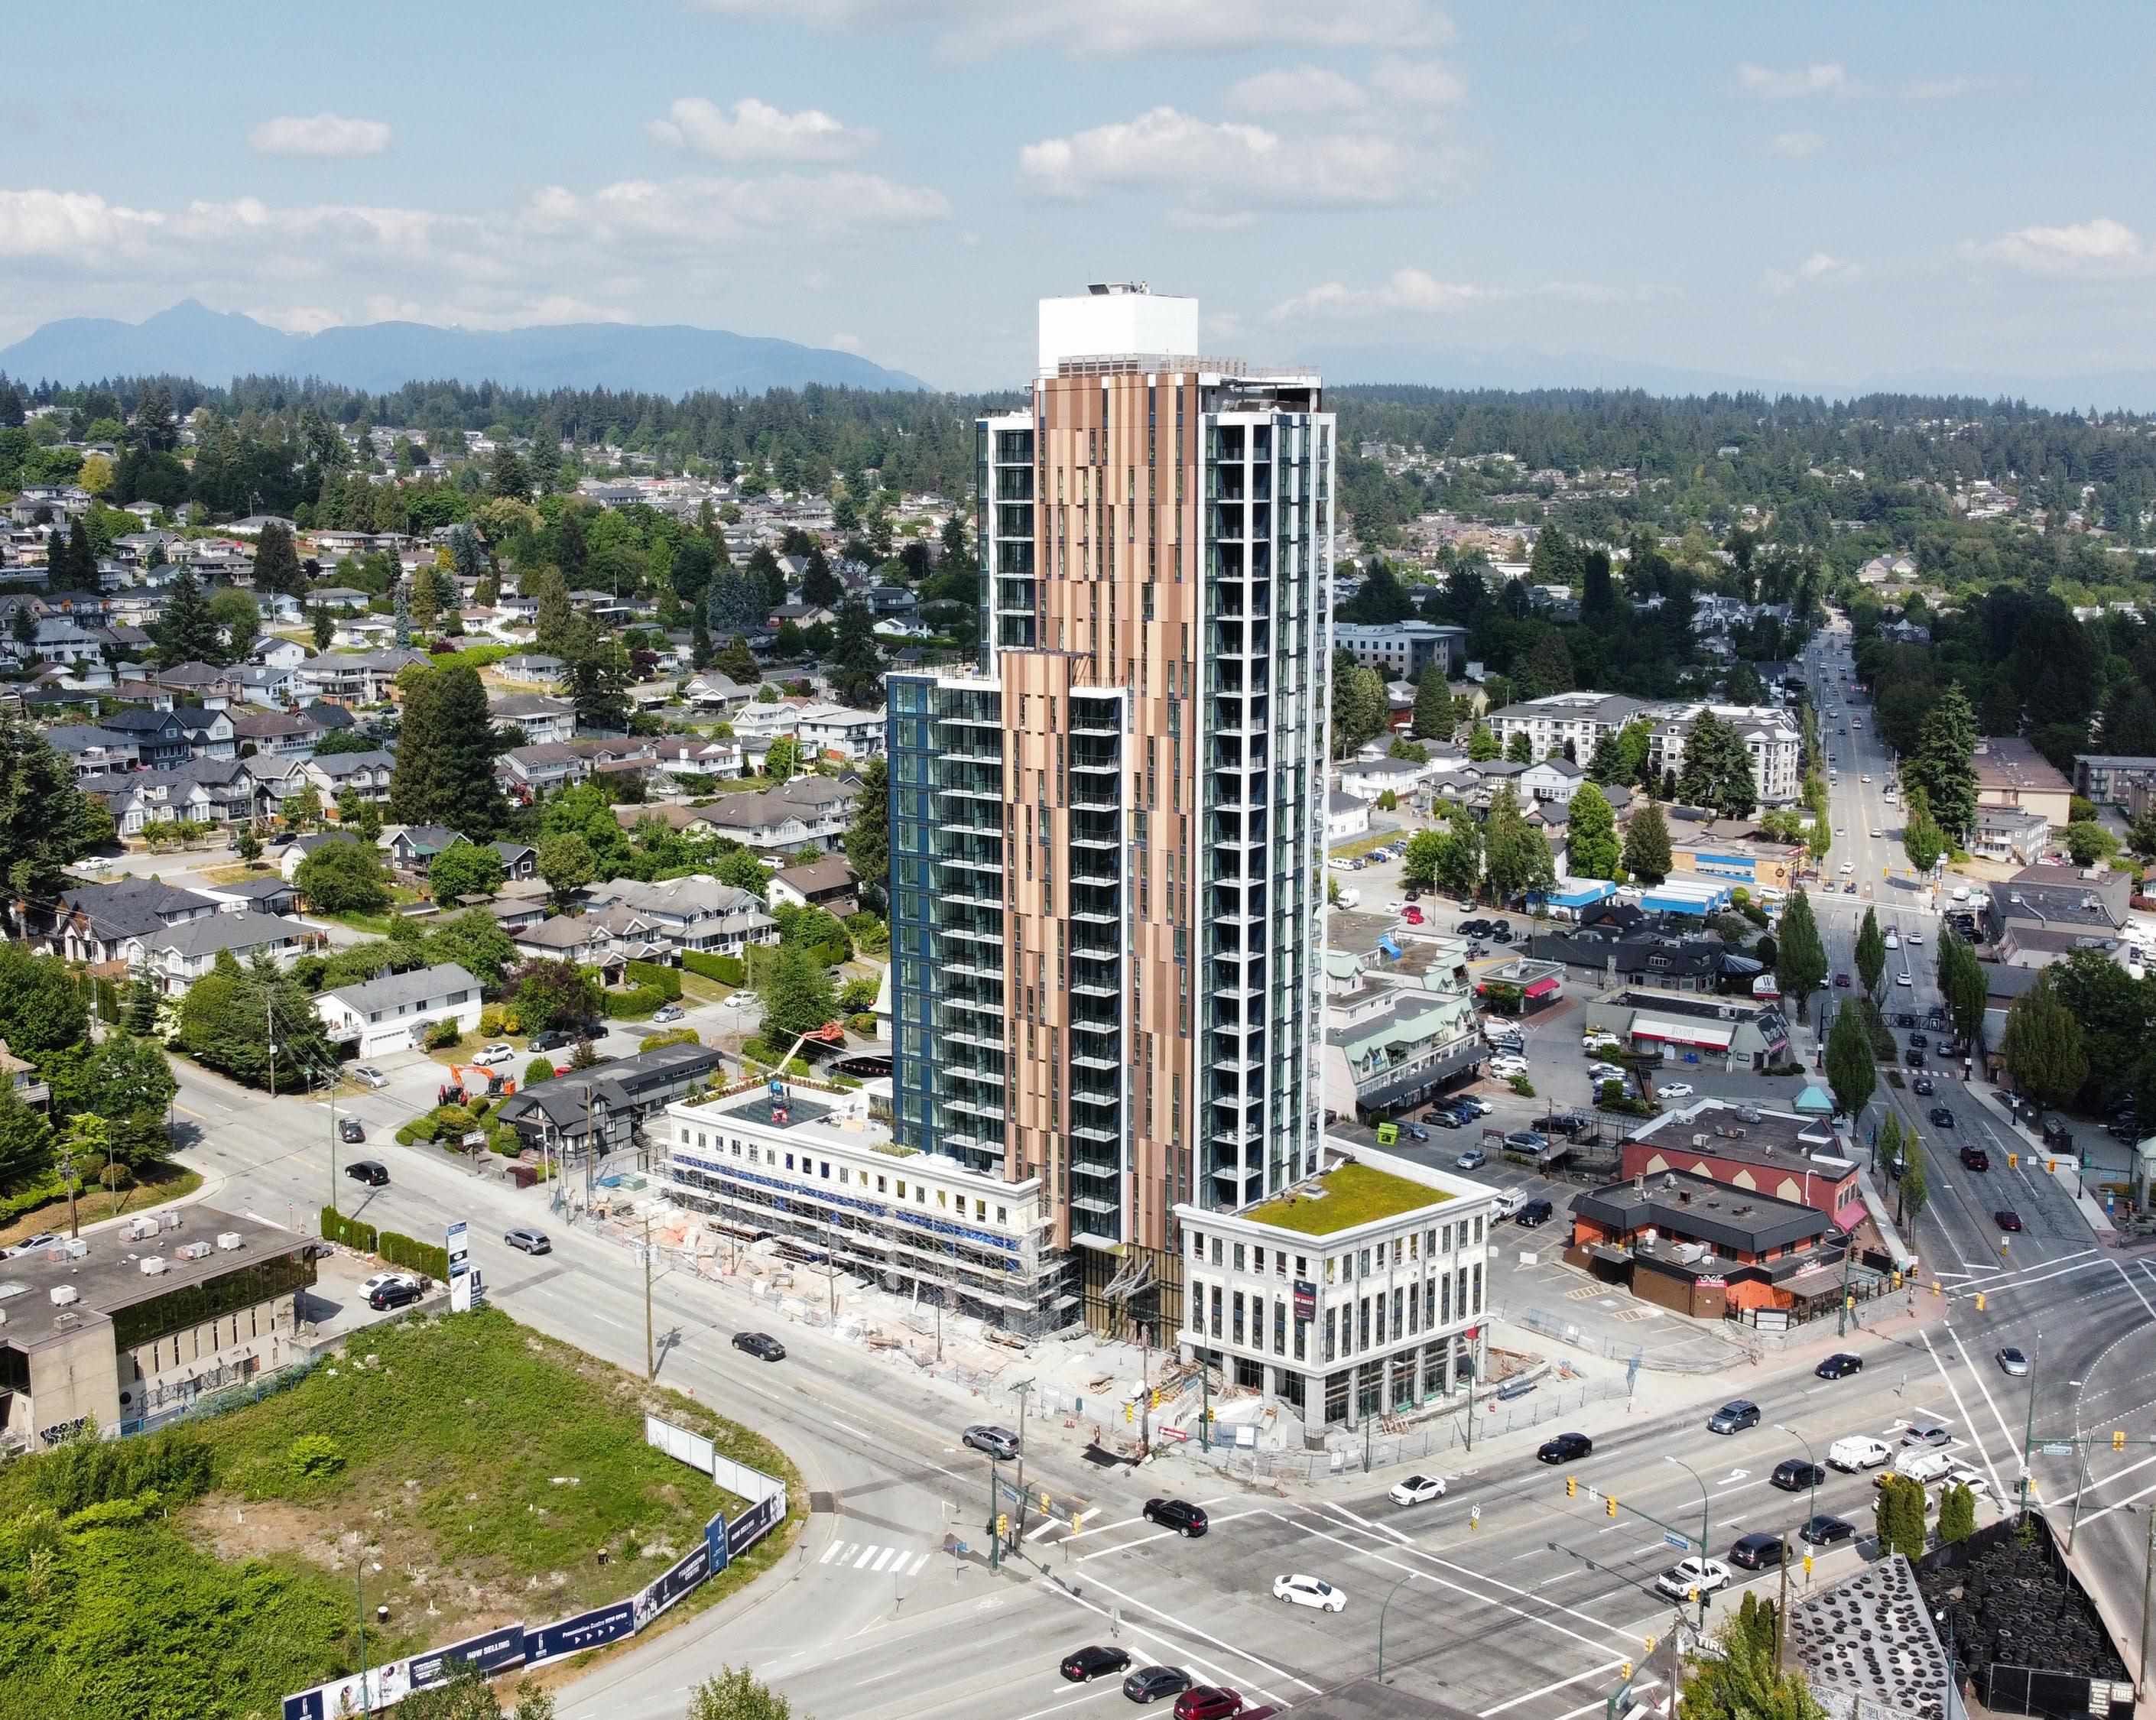 Main Photo: 401-910 901 LOUGHEED Highway in Coquitlam: Maillardville Multi-Family Commercial for sale : MLS®# C8052113